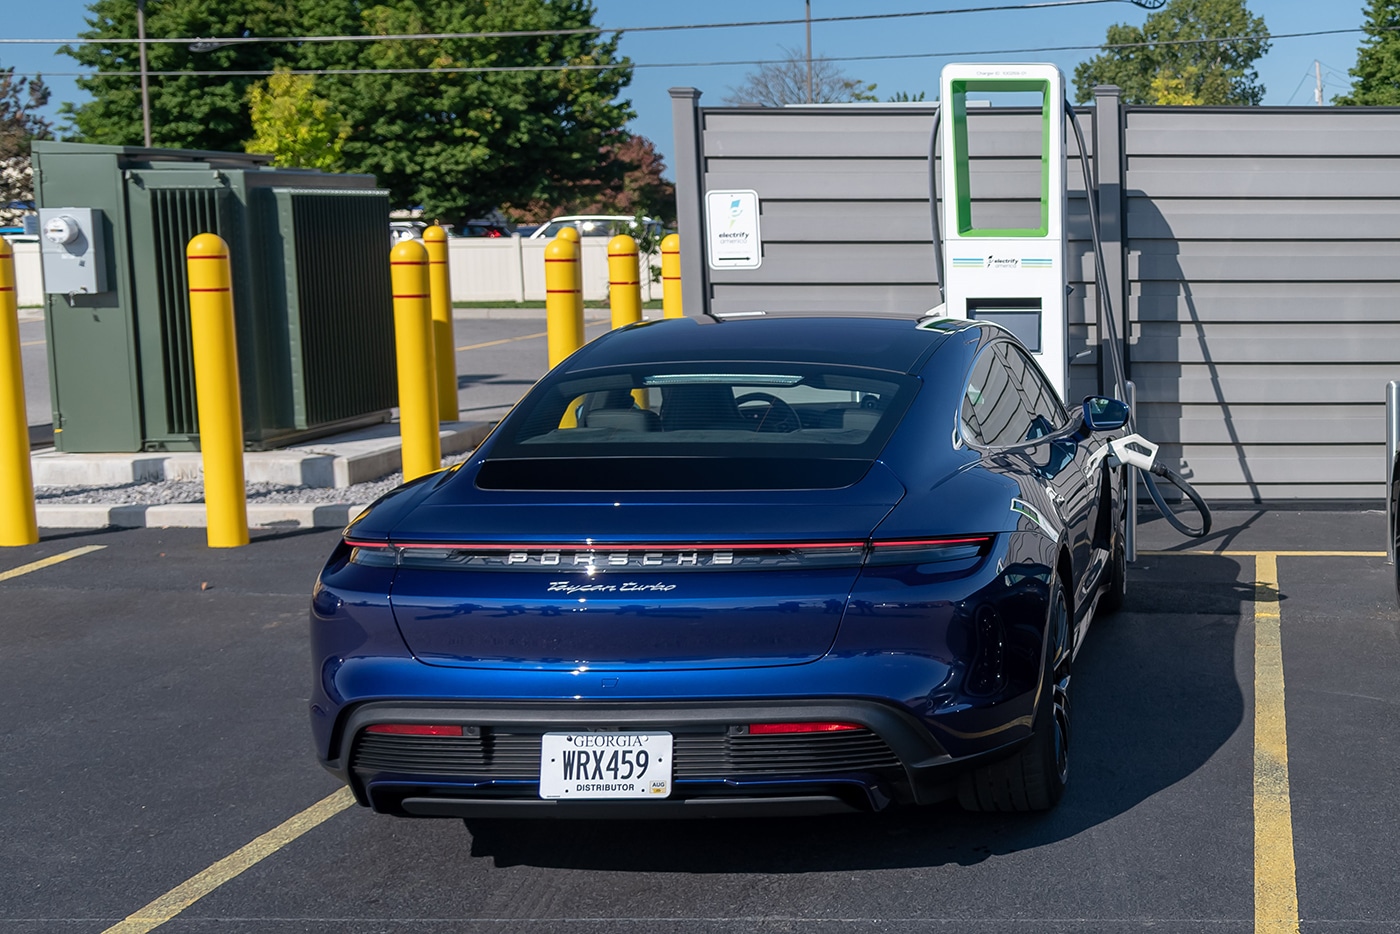 Electrify America's Open Network of Ultra-Fast DC Chargers, first to charge an 800-Volt electric vehicle battery at 270 kW. Credit: Electrify America